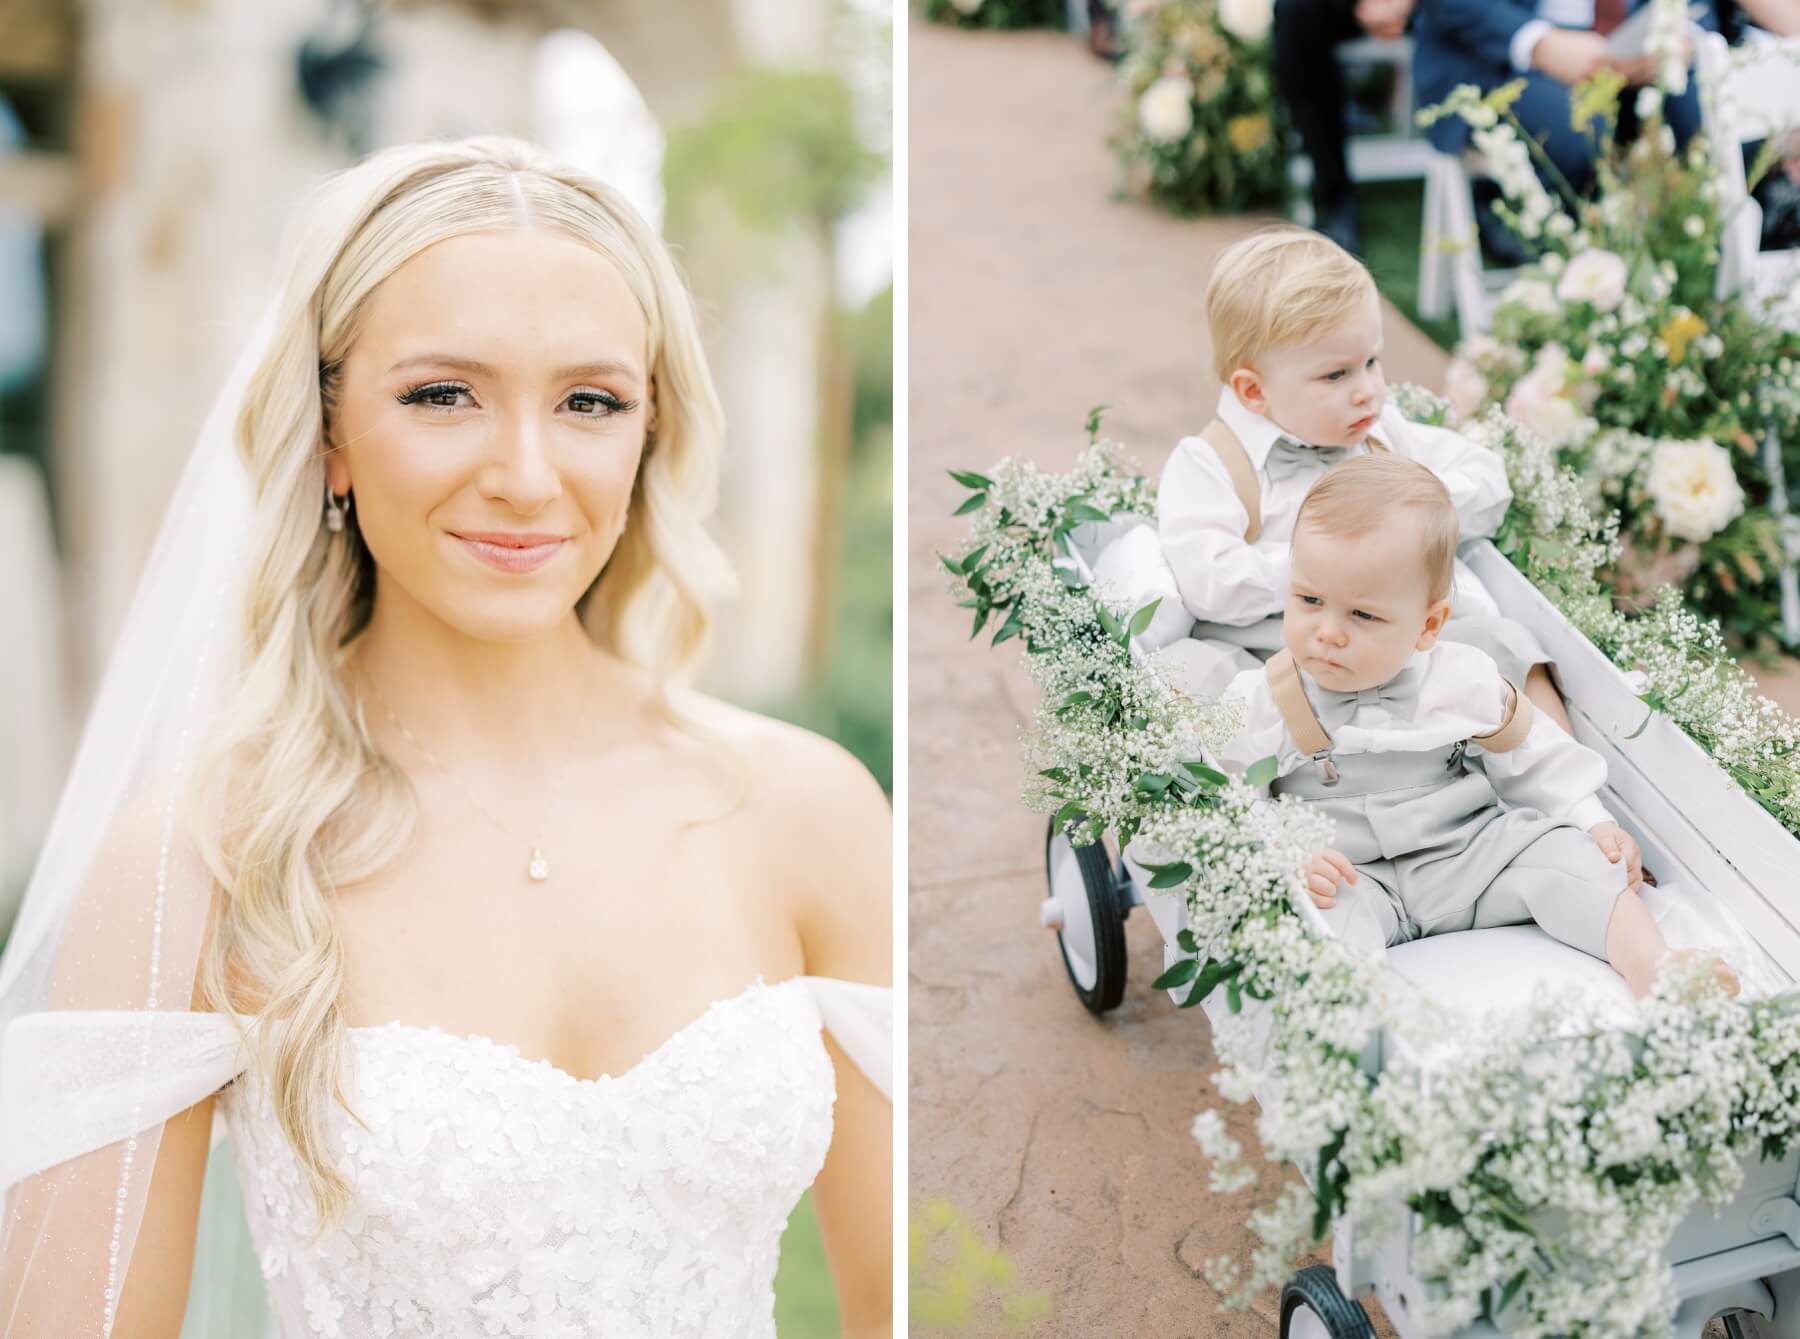 Bride wearing off the shoulder floral dress and ring bearers in wagon with white floral decor